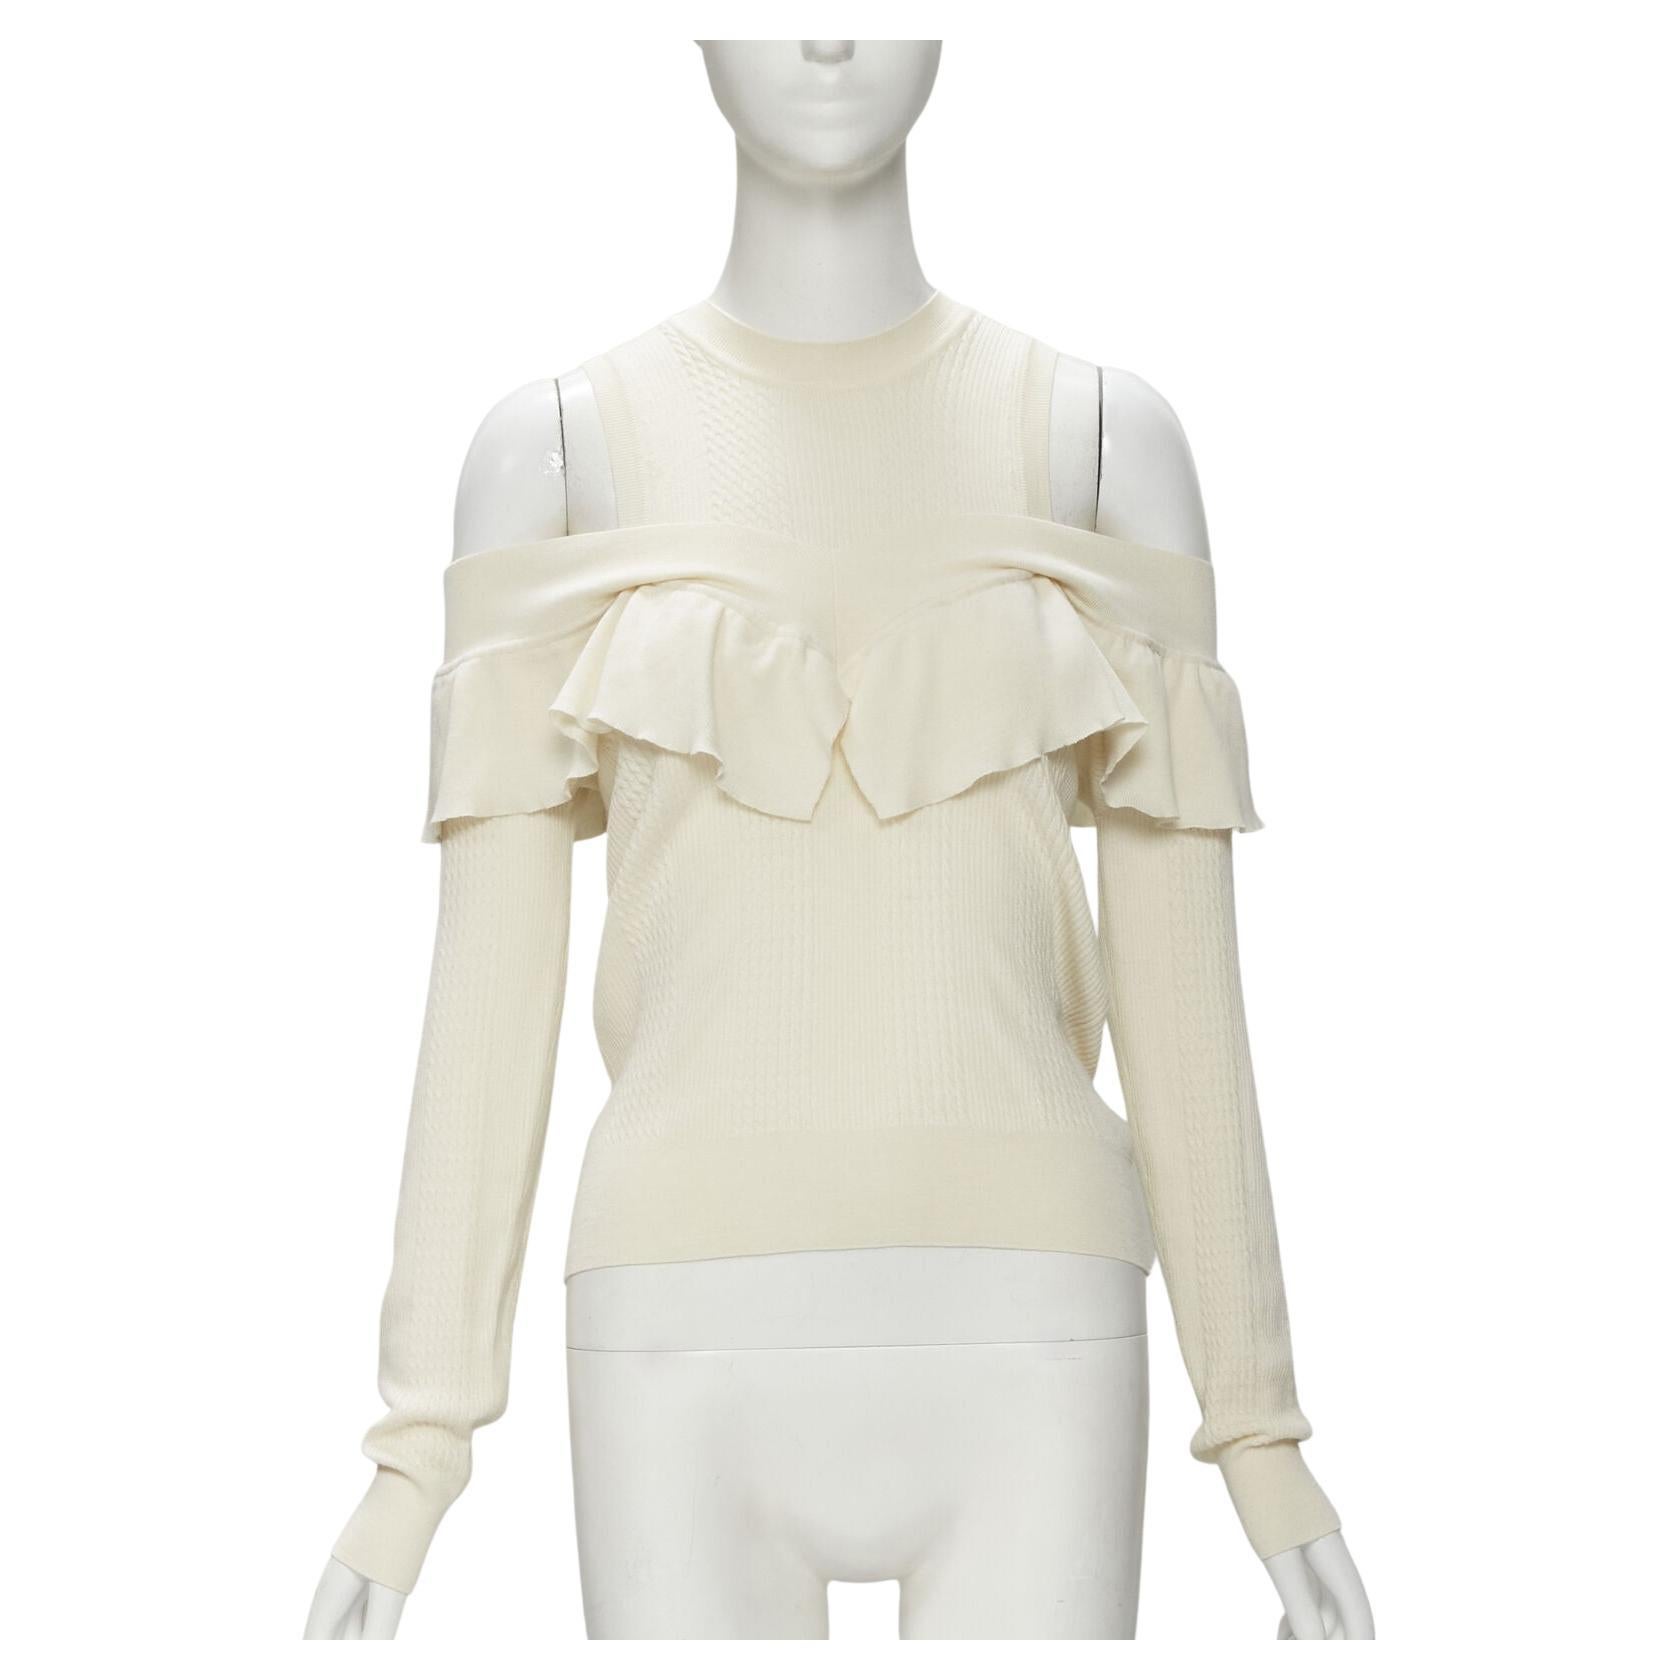 Authentic Louis Vuitton Cream Solid Cashmere Top on sale at JHROP